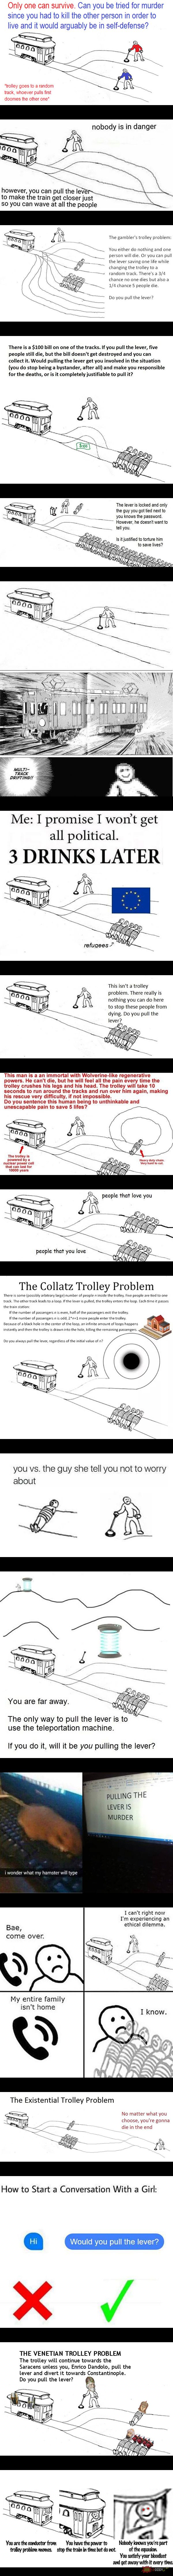 The best of trolley problem